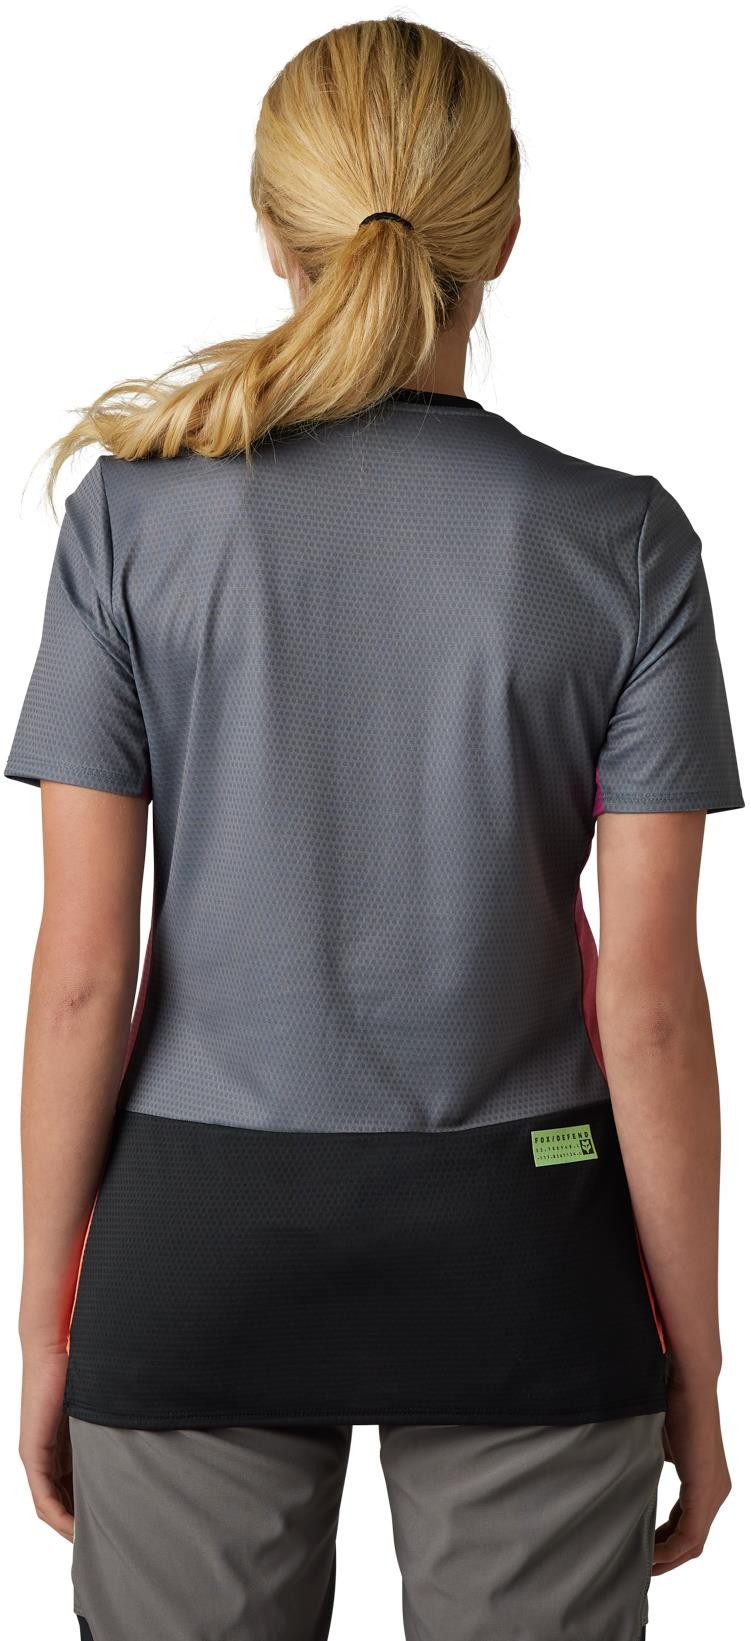 Defend Race Womens Short Sleeve Cycling Jersey image 2